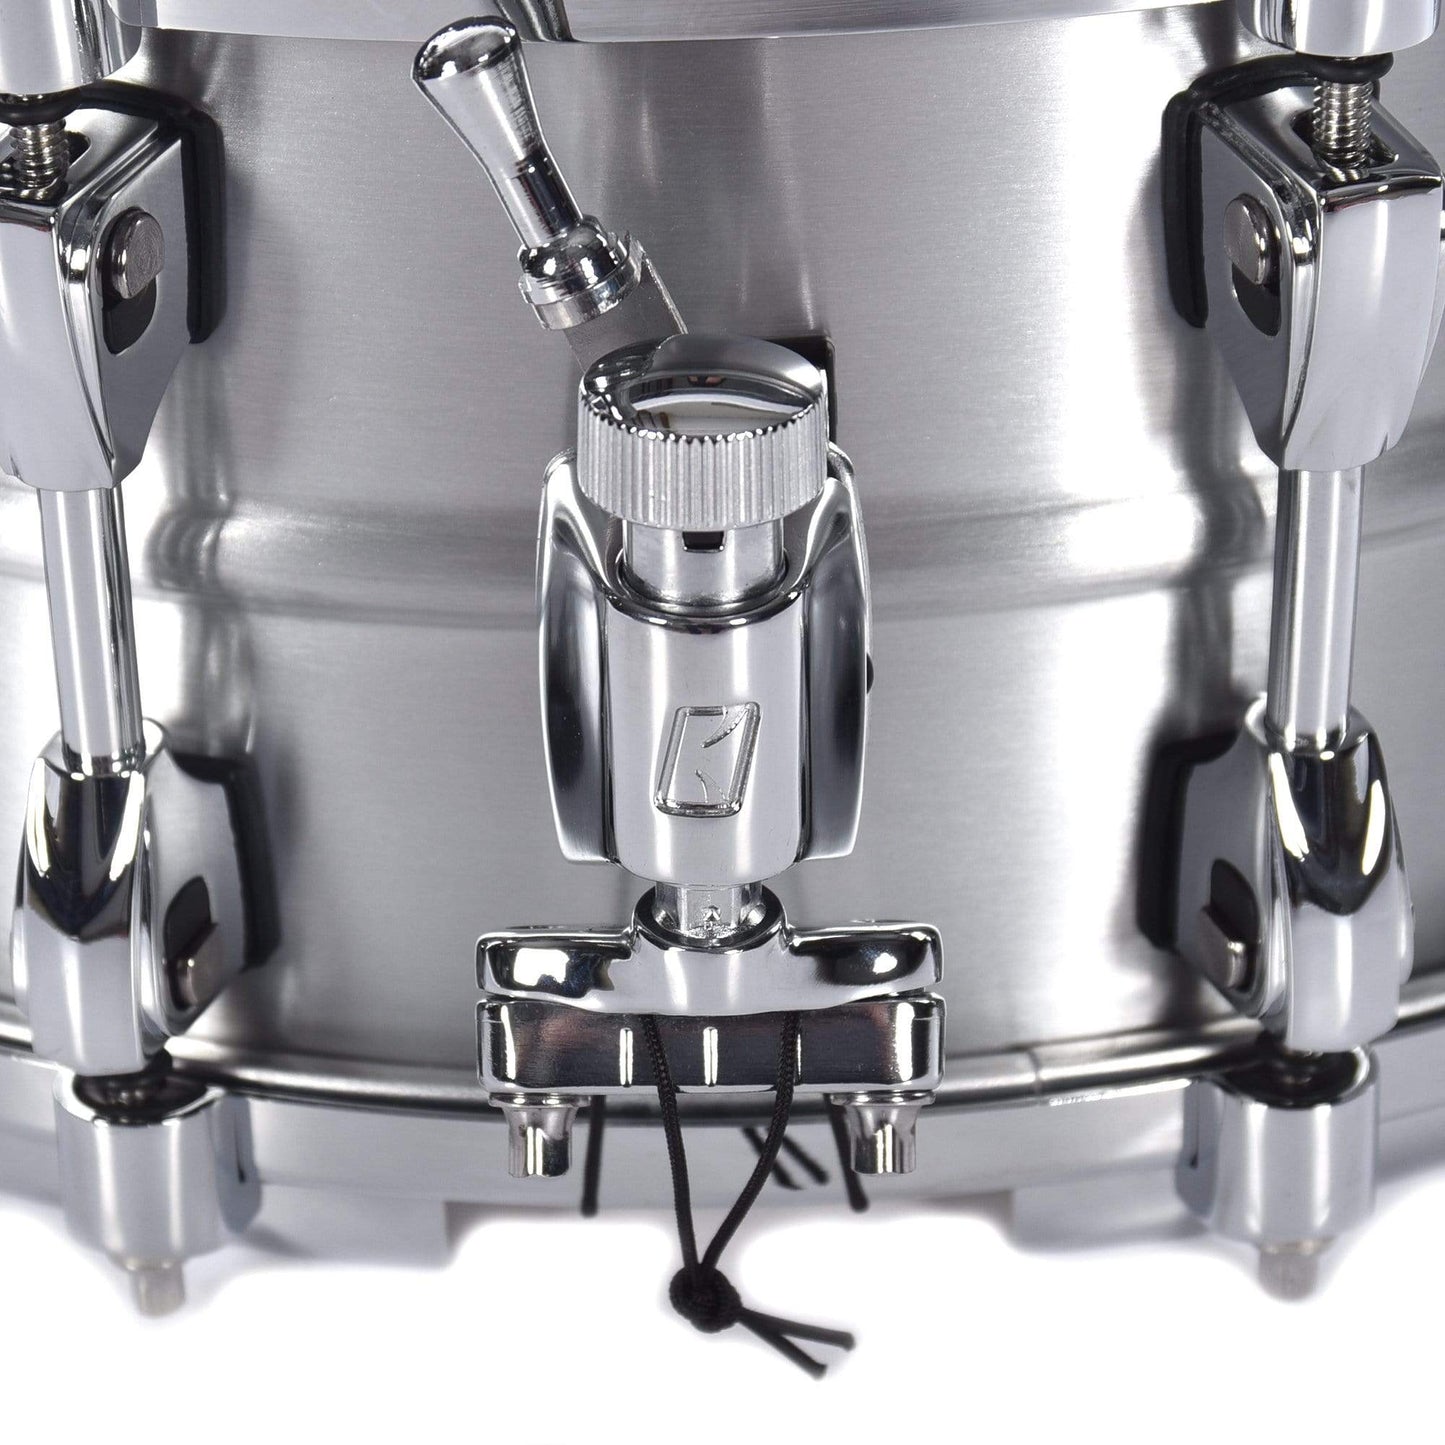 Tama 6x14 Starphonic Aluminum Snare Drum Drums and Percussion / Acoustic Drums / Snare